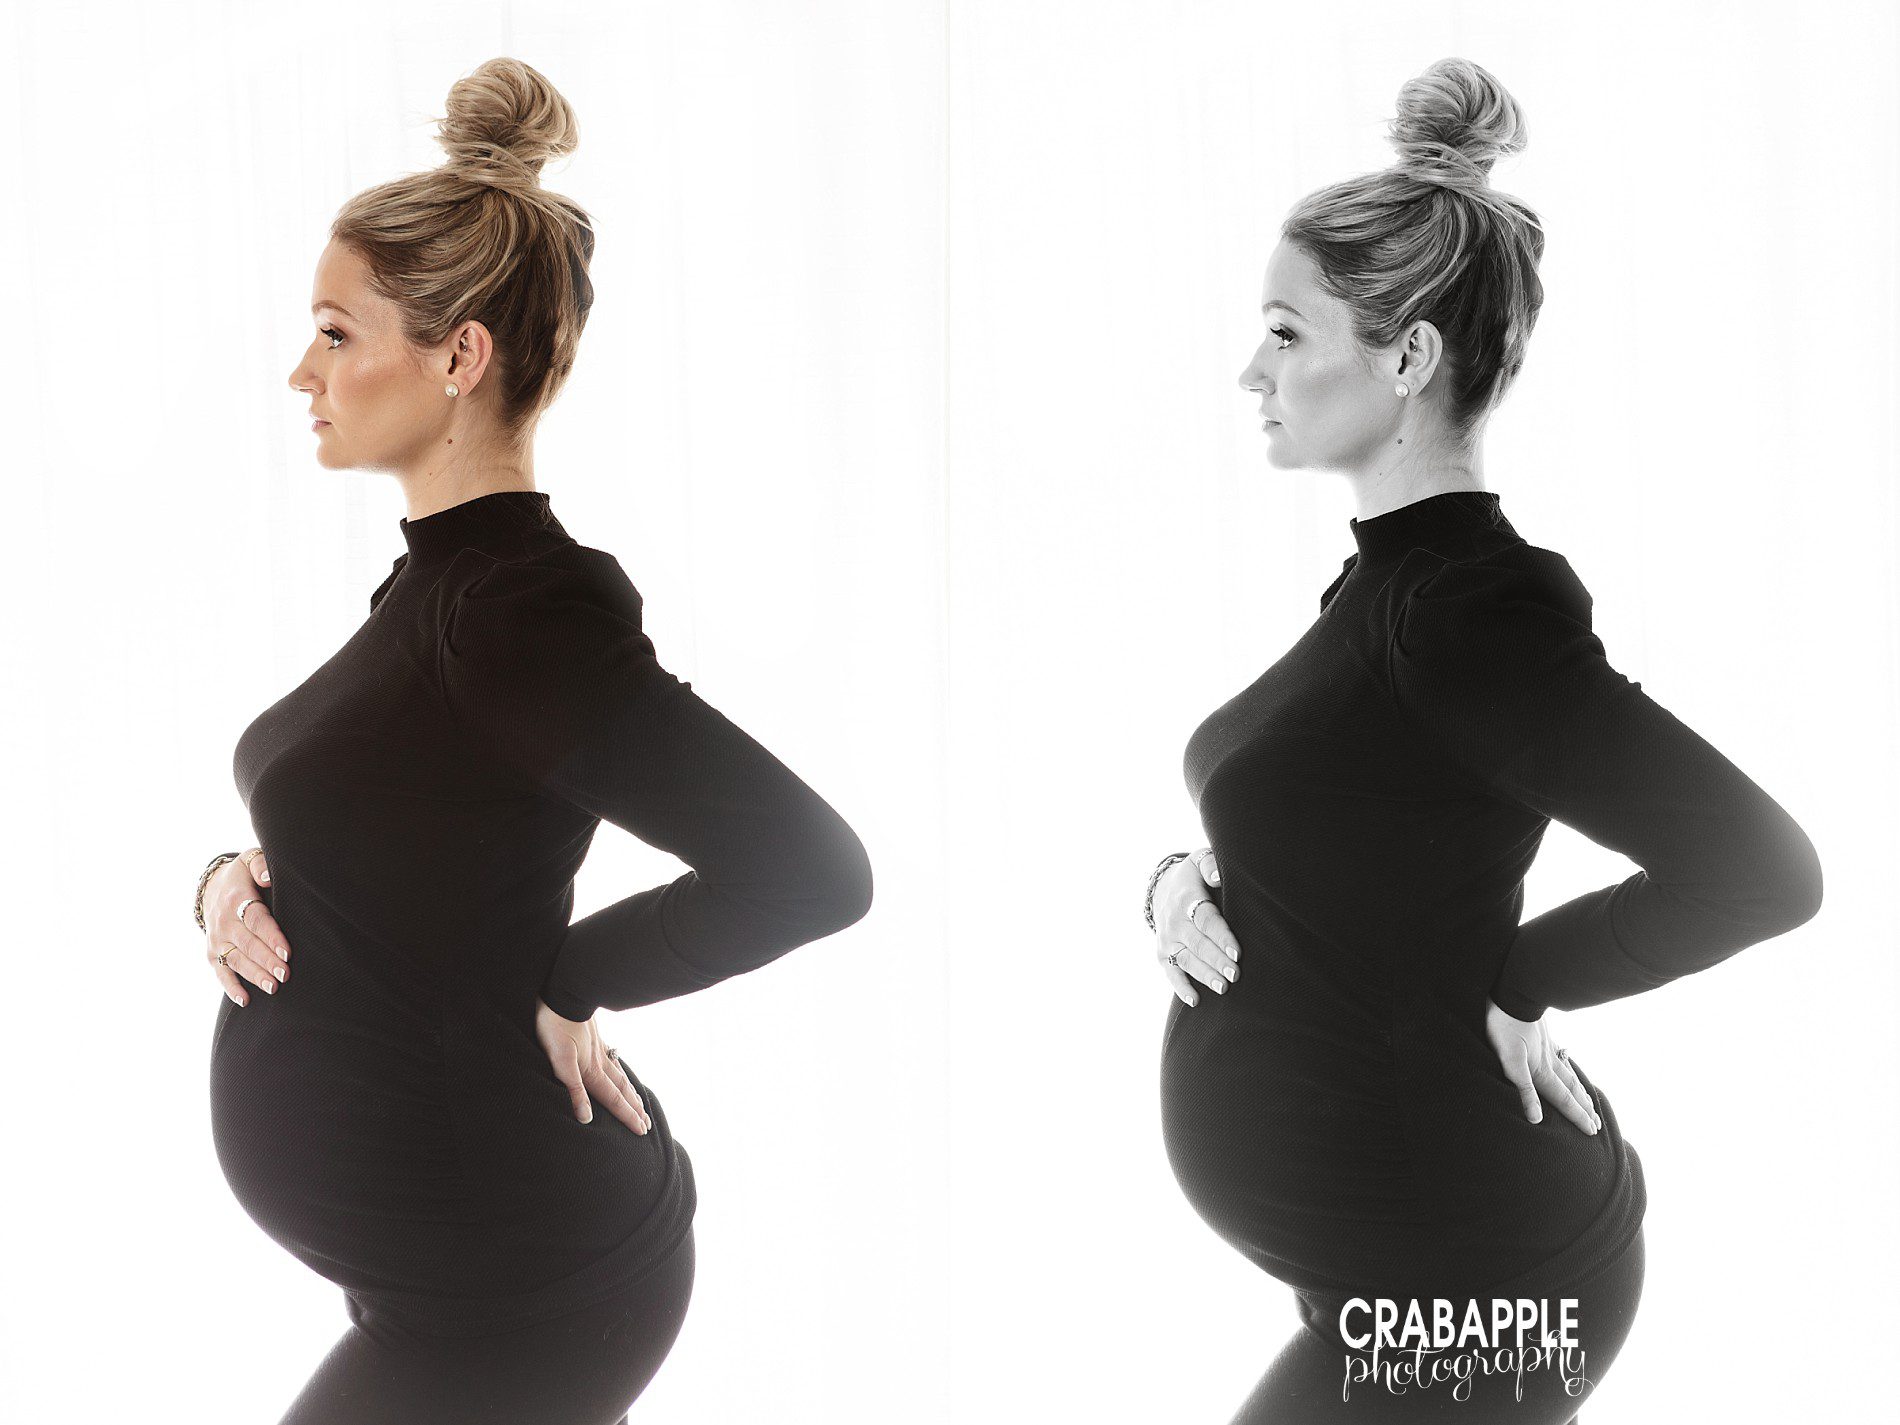 black and white vs color maternity photos